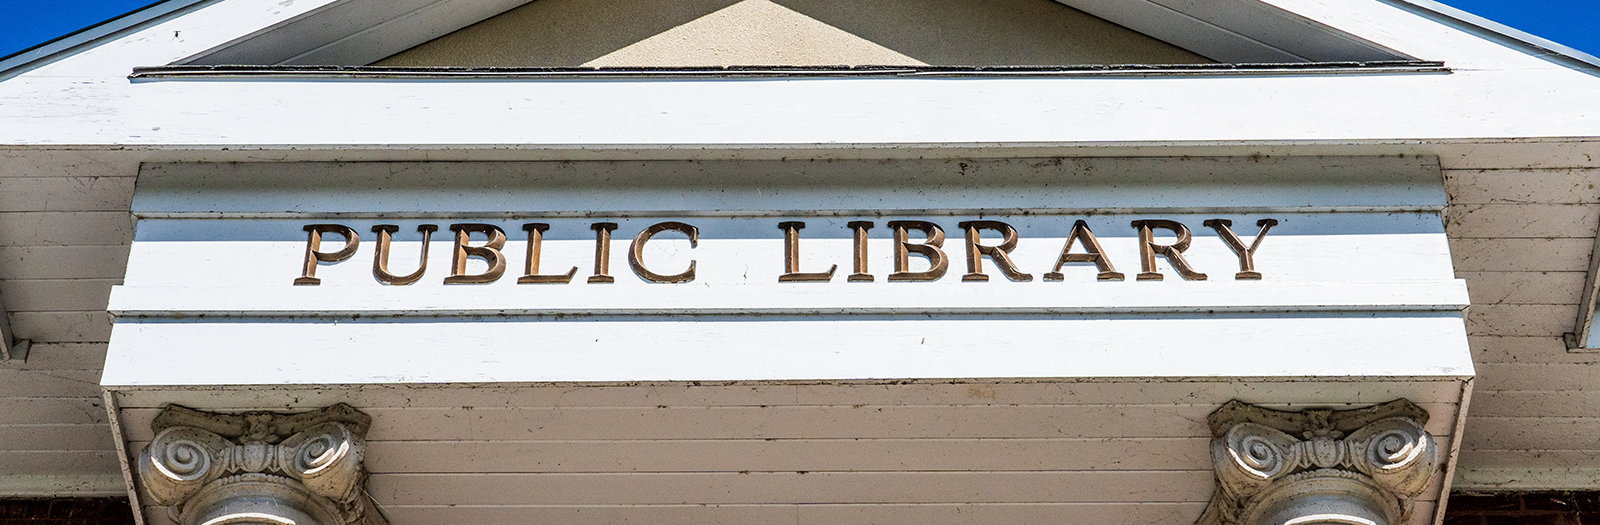 public library sign